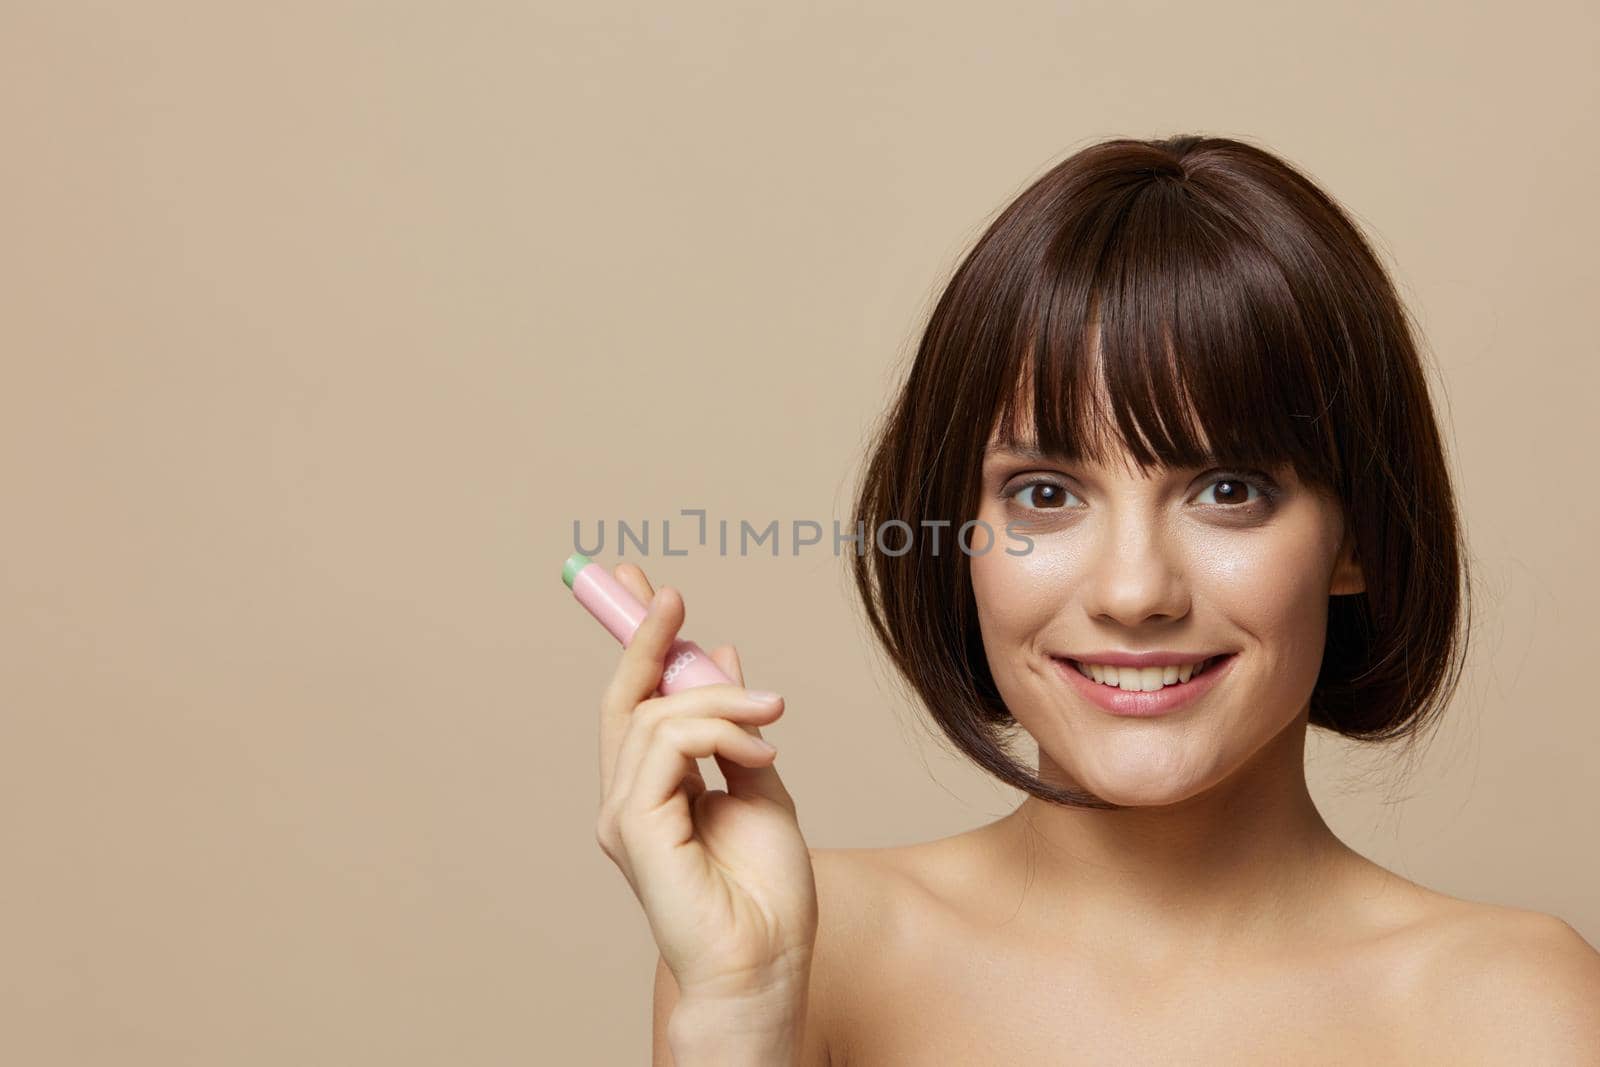 brunette makeup lip gloss near the face bare shoulders beige background. High quality photo